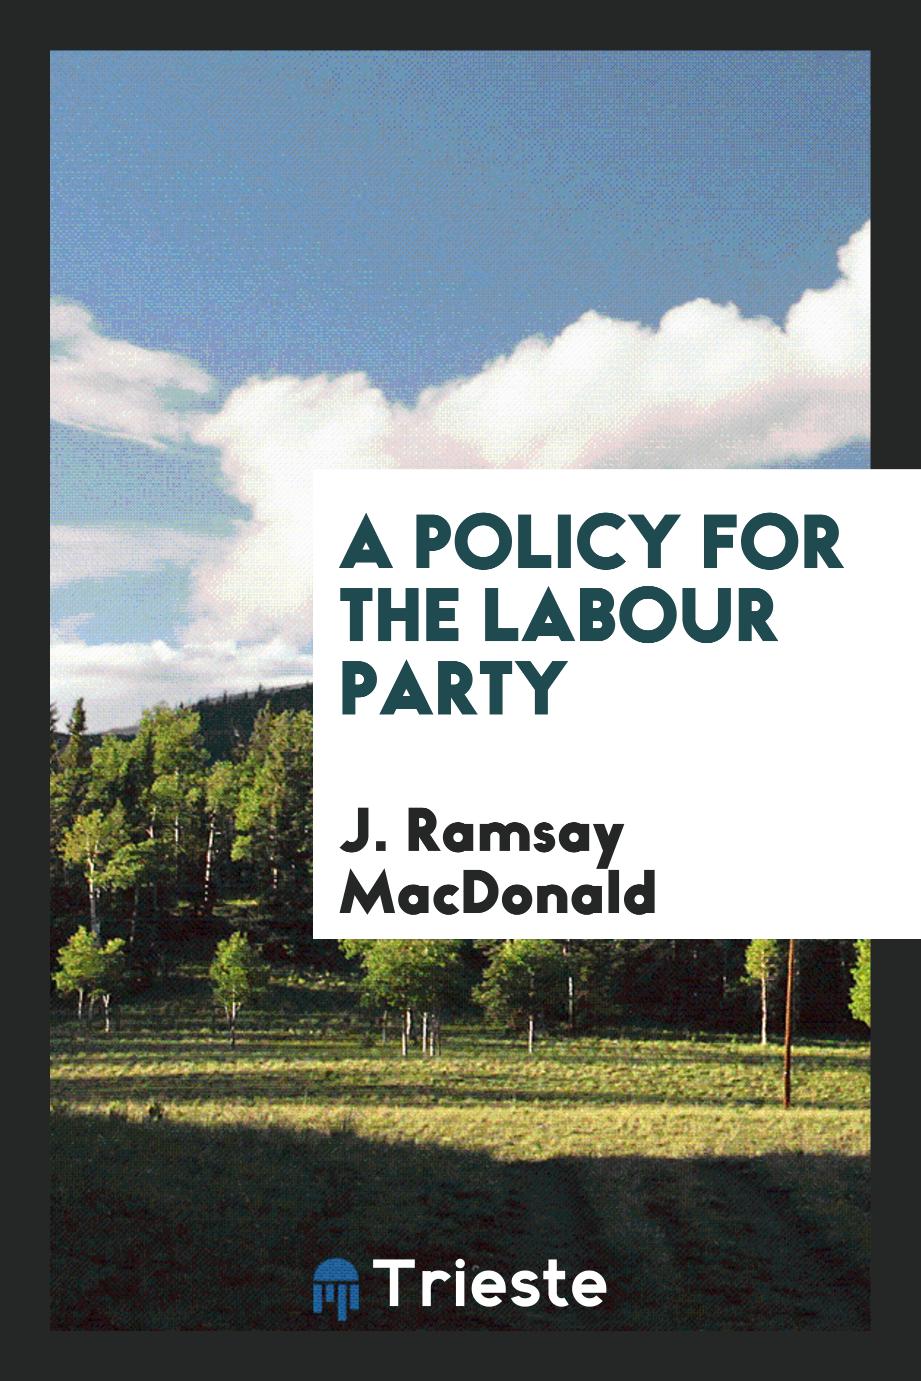 A policy for the labour party